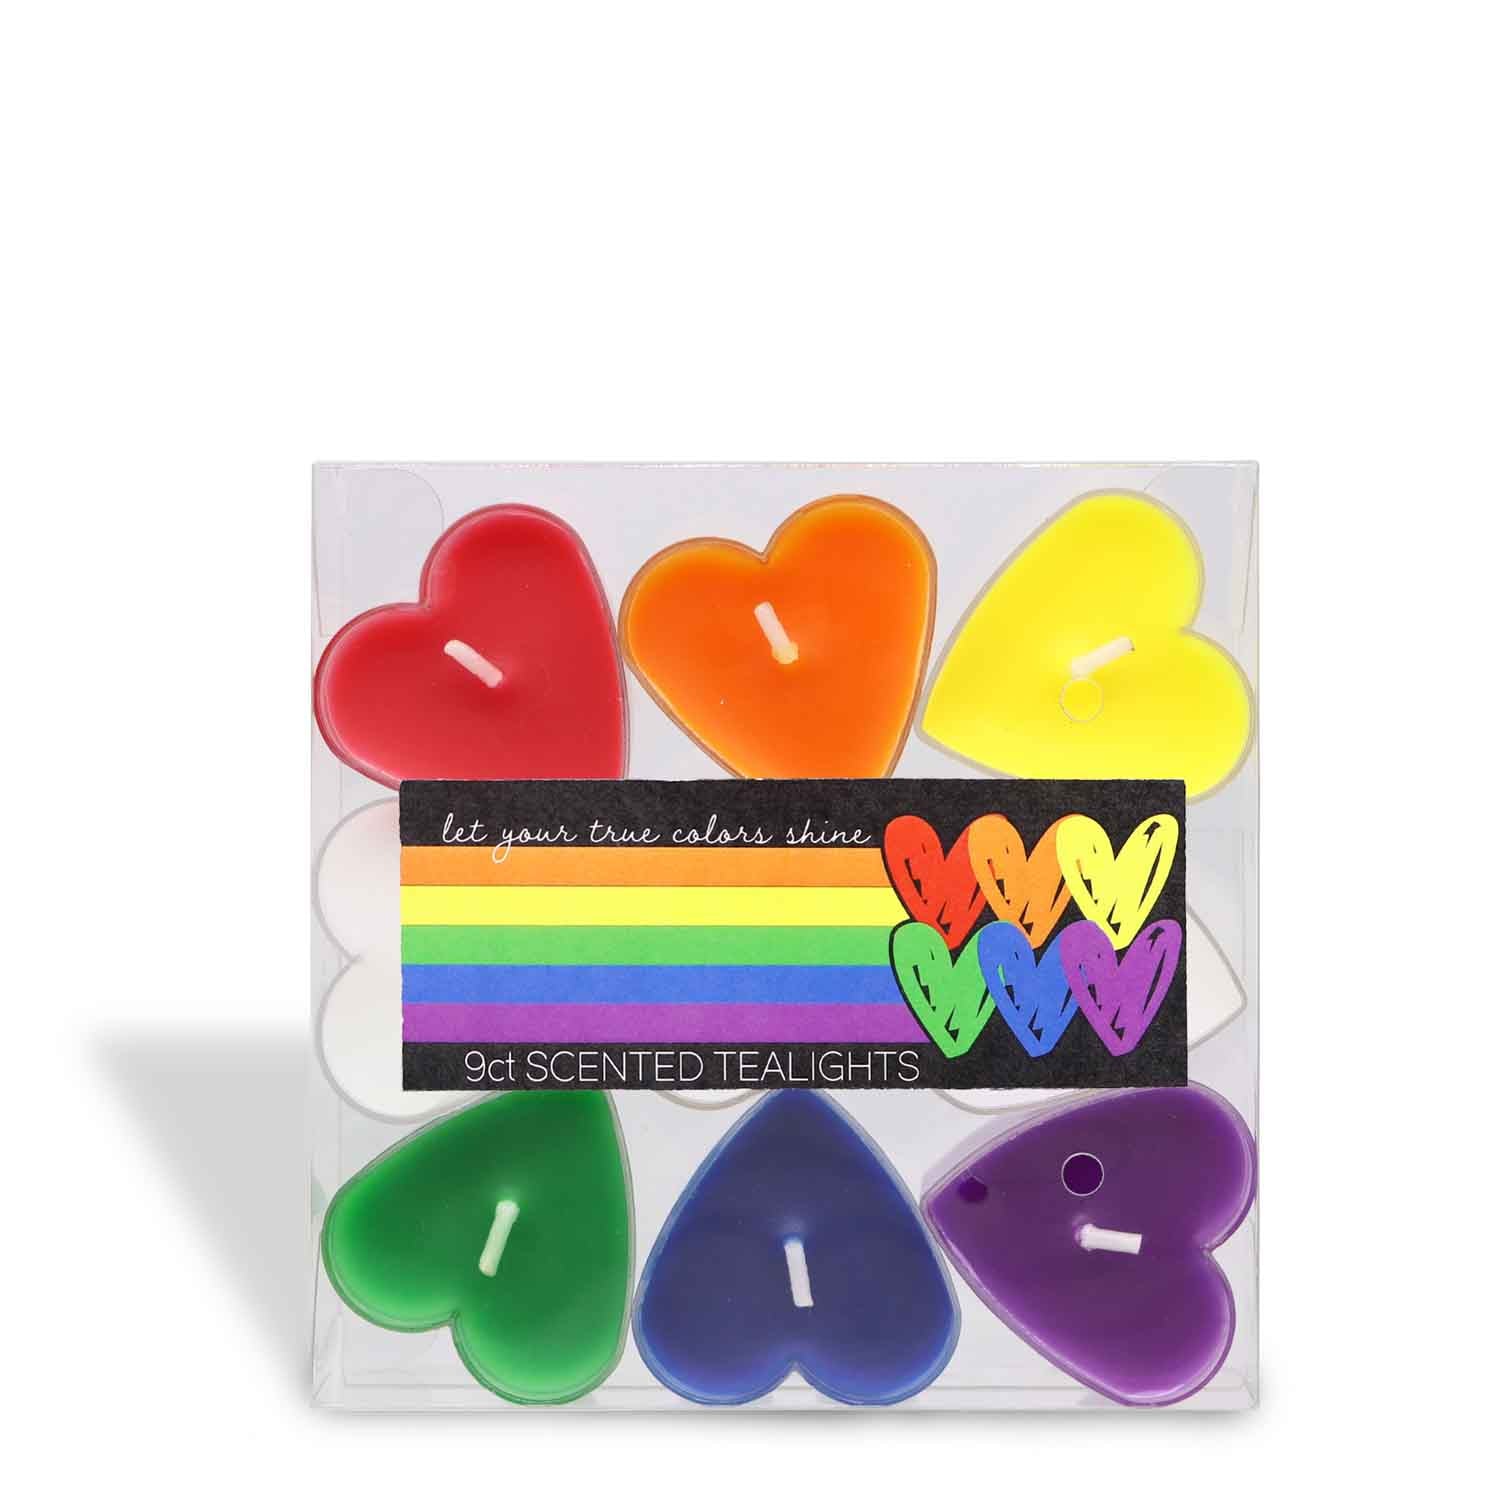 A set of Pride Heart scented tealights (9-piece set) in a box by Tuscany Candle® SEASONAL.